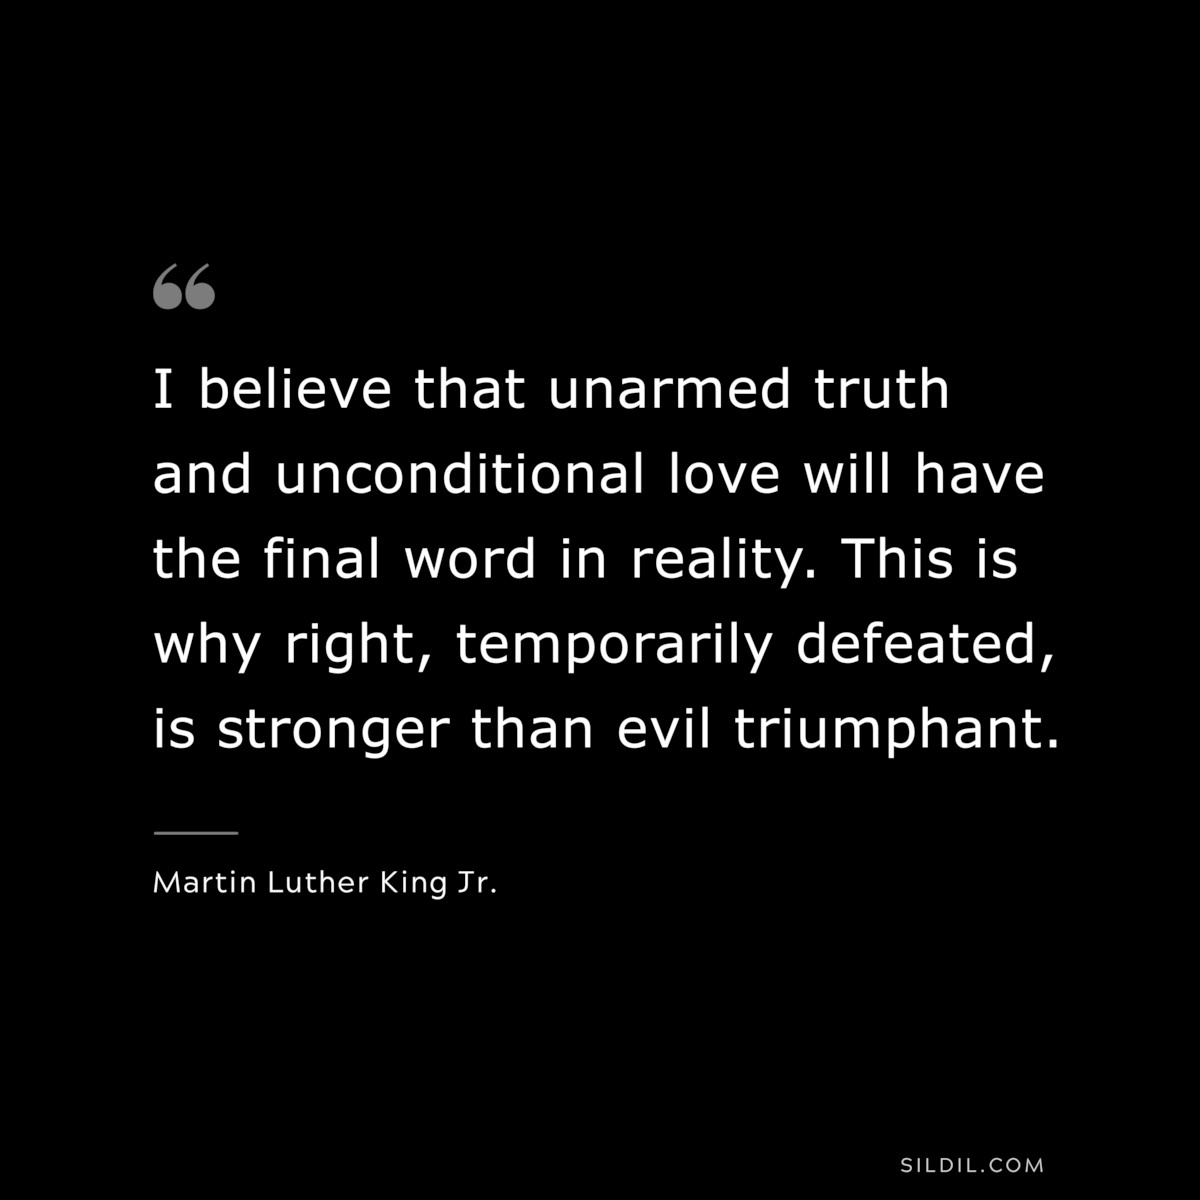 I believe that unarmed truth and unconditional love will have the final word in reality. This is why right, temporarily defeated, is stronger than evil triumphant. ― Martin Luther King Jr.